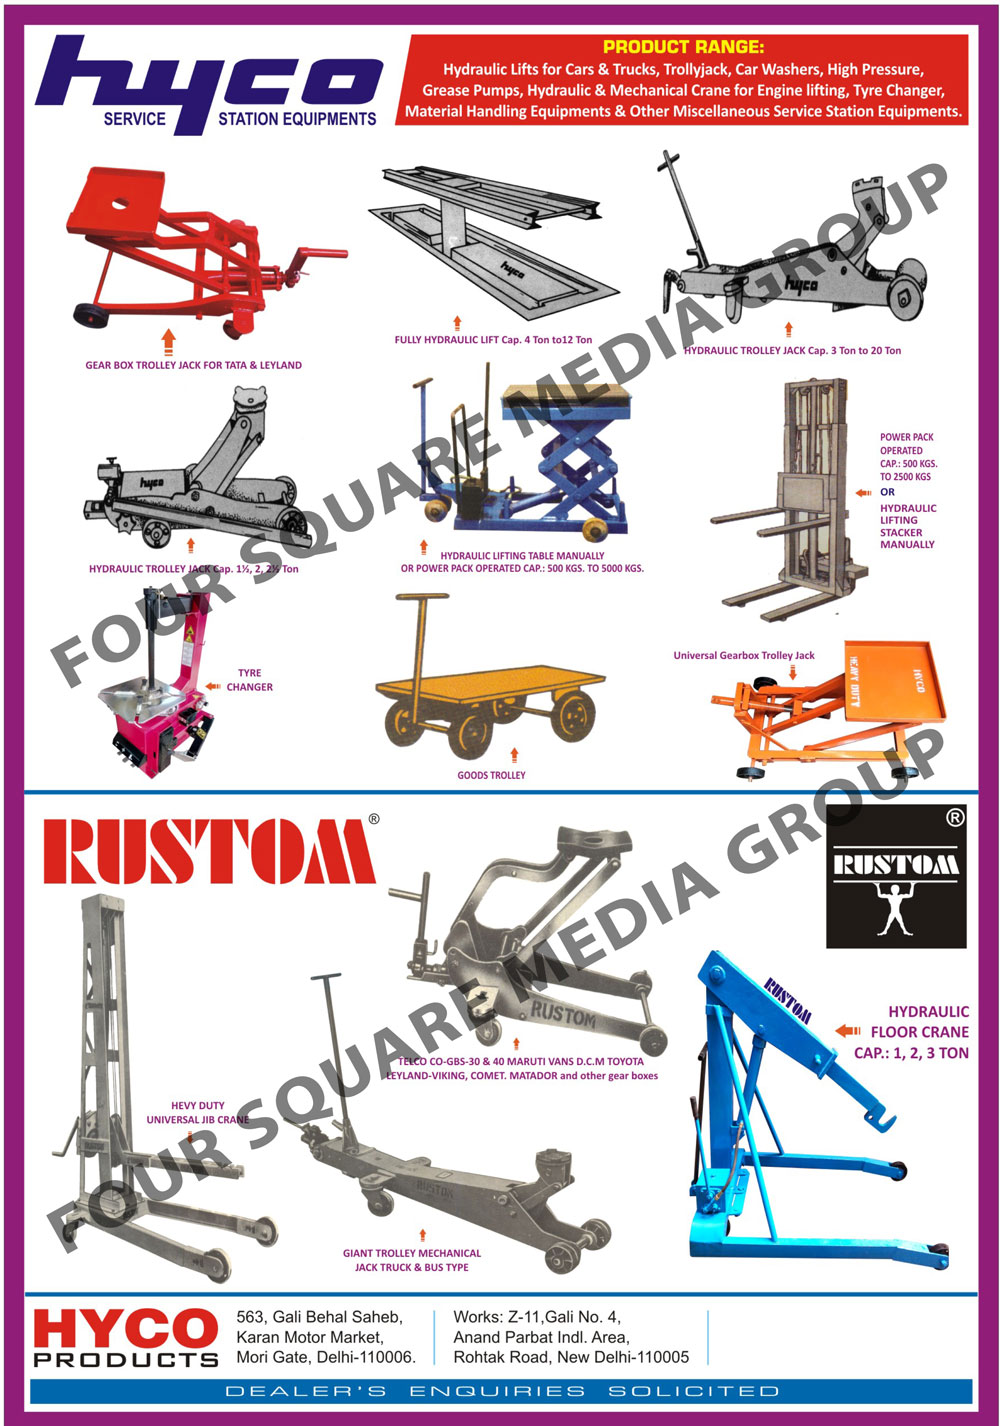 Car Hydraulic Lifts, Truck Hydraulic Lifts, Car Washers, Grease Pumps, Engine Lifting Hydraulic Cranes, Engine Lifting Mechanical Cranes, Air Compressors, Tyre Changers, Service Station Material Handling Equipments, Miscellaneous Service Station Equipments, Miscellaneous Garage Equipments, Hydraulic Trolley Jacks, Gear Box Trolley Jacks, Hydraulic Lifting Tables, Universal Jib Cranes, Tyre Changers, Hydraulic Floor Cranes, Goods Trolley, Hydraulic Pallet Trucks, Hydraulic Lifting Stacker, Fully Hydraulic Lifts, Automotive Jacks